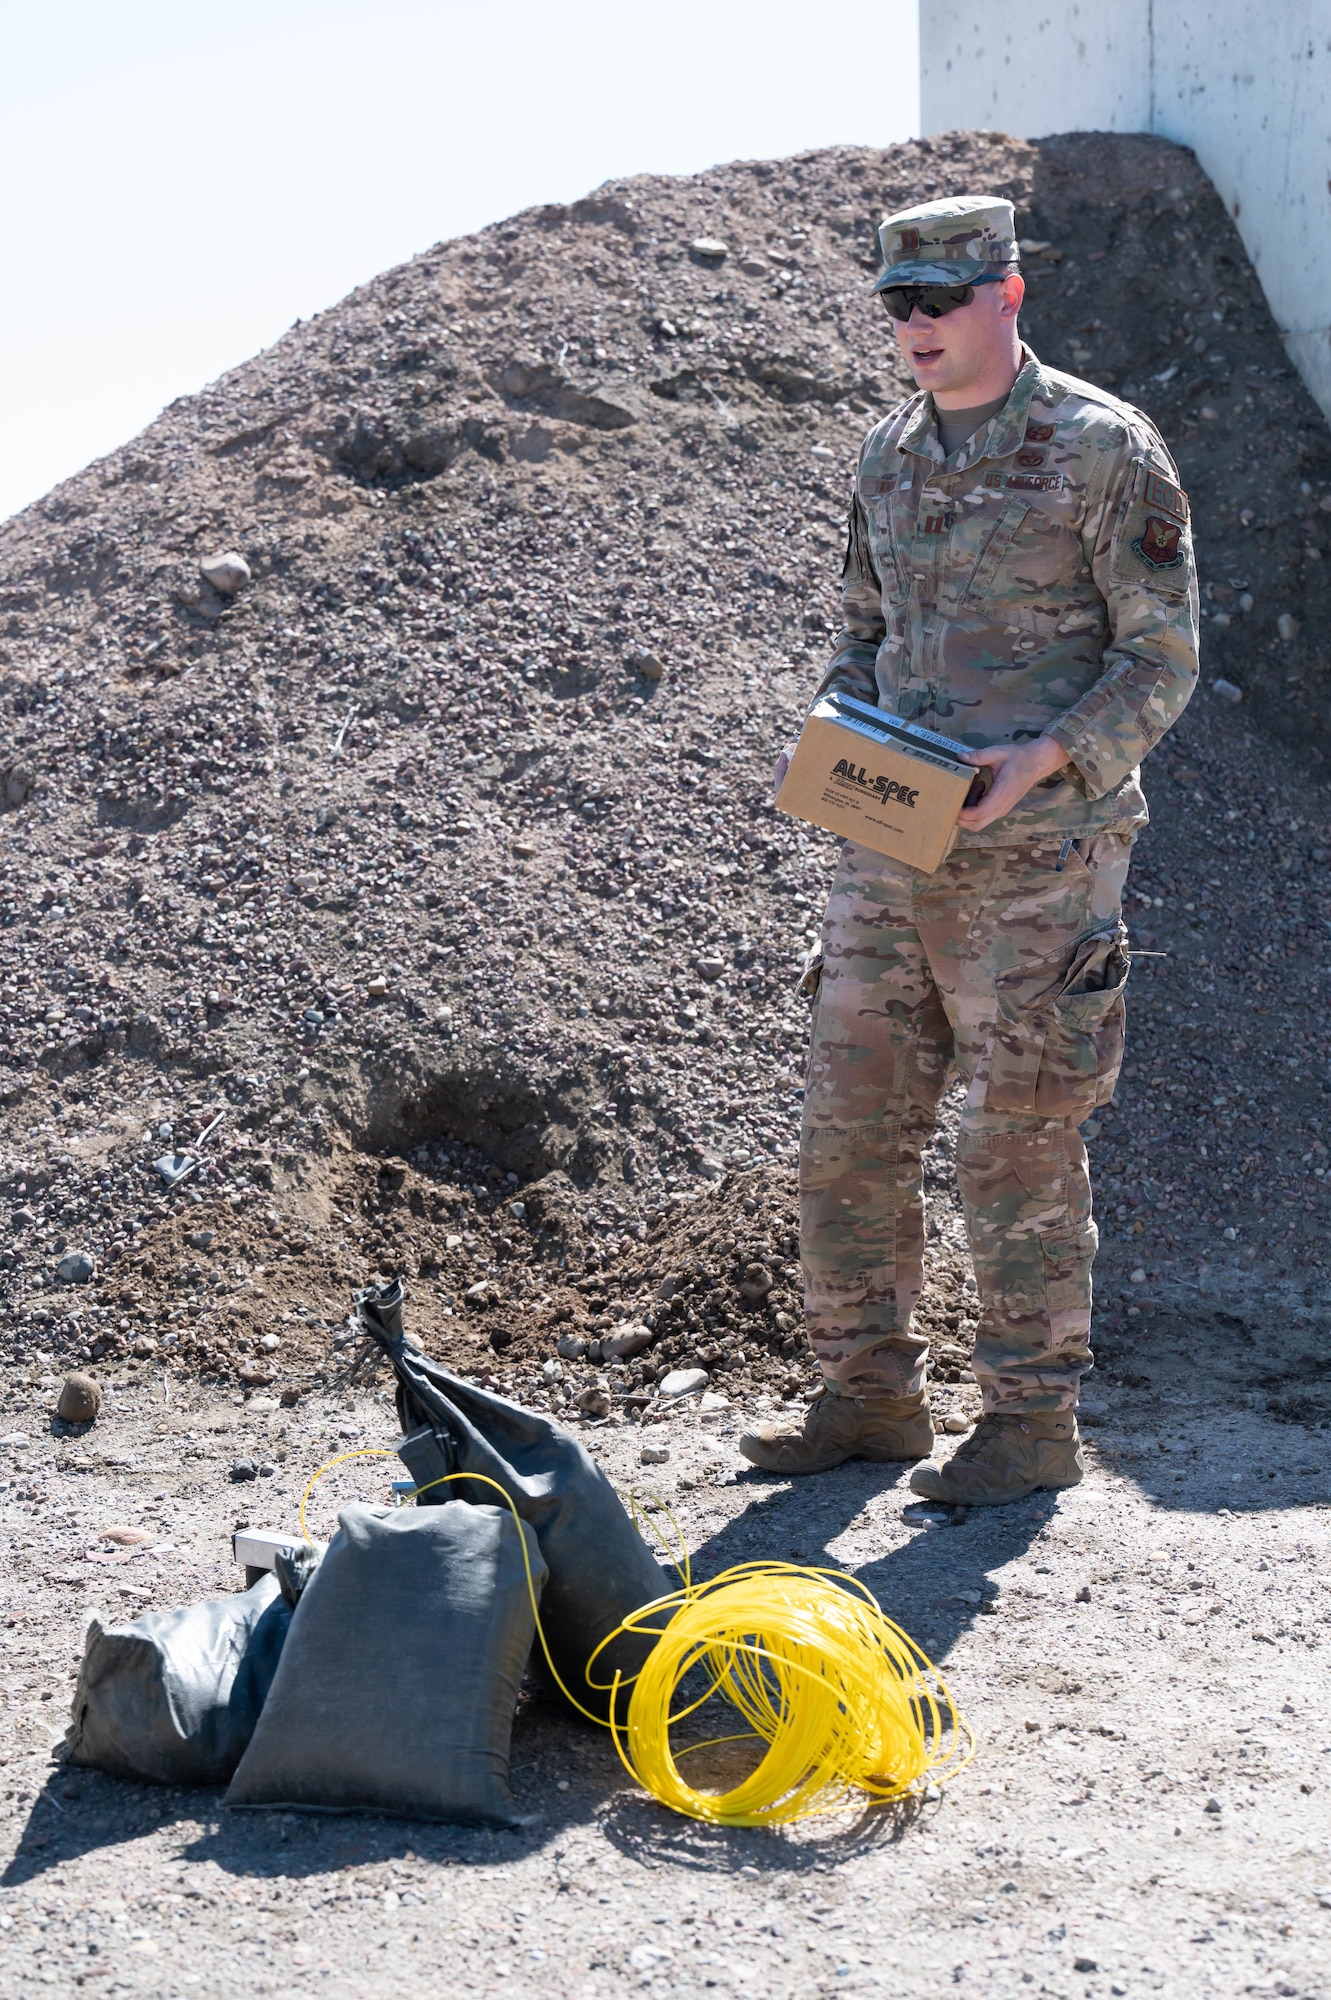 Capt. William Knox, 341st Civil Engineer Squadron explosive ordnance disposal flight commander, explains how a remote-fired shotgun fired a hole through a cardboard box during a training demonstration June 2, 2021, at Malmstrom Air Force Base, Mont.